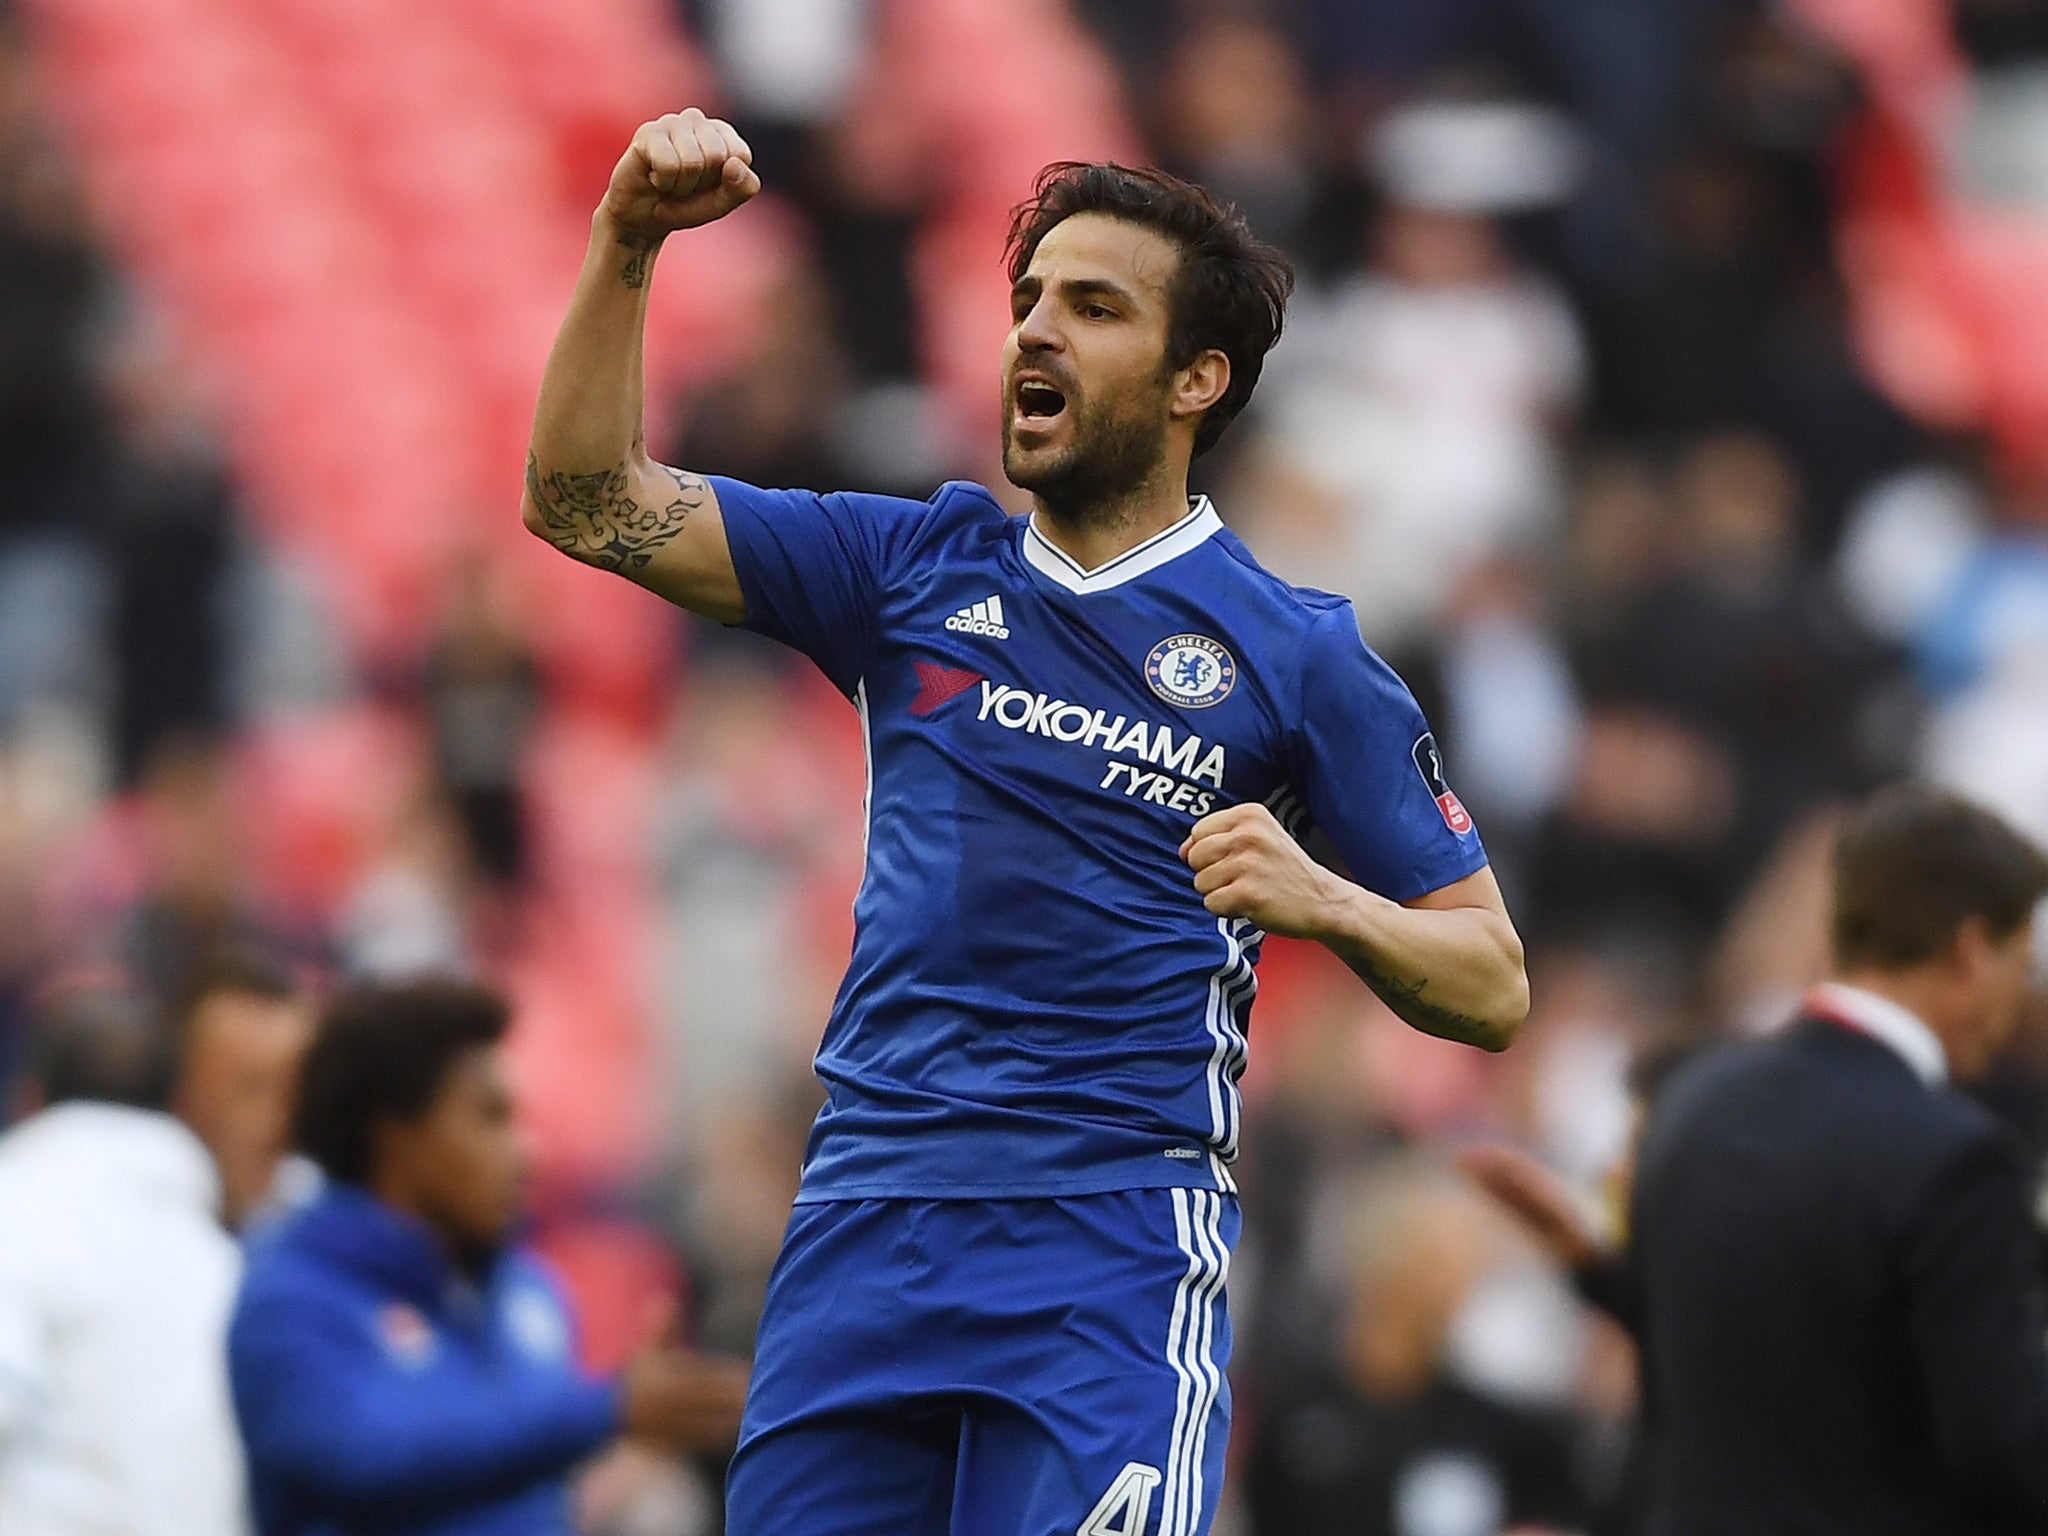 Chelsea are on course for a 'special' league and cup double this season